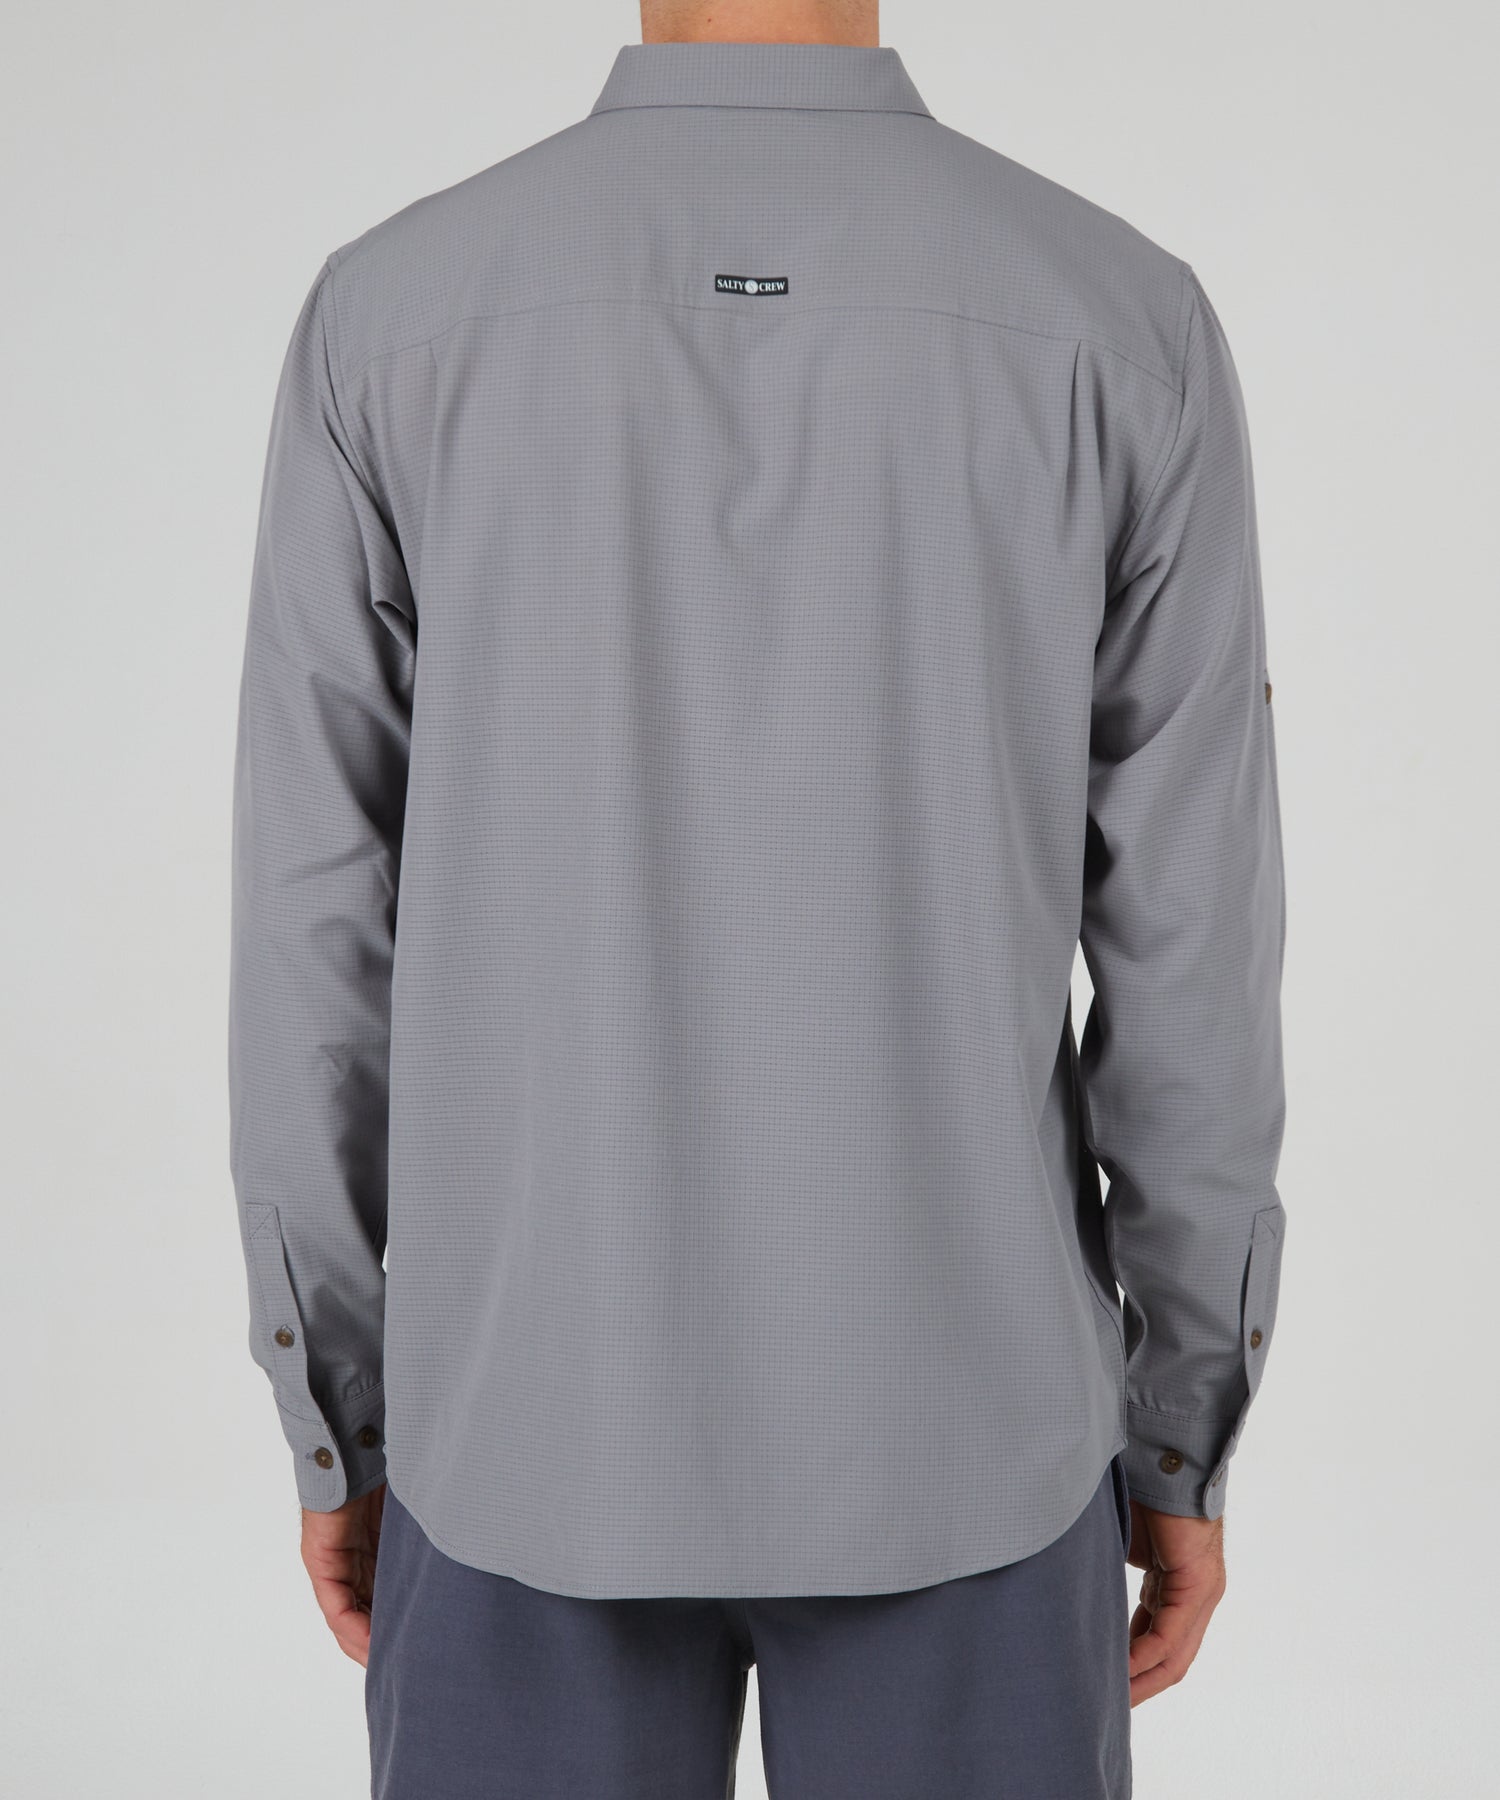 back view of Skipper Perforated Dark Grey L/S Tech Woven